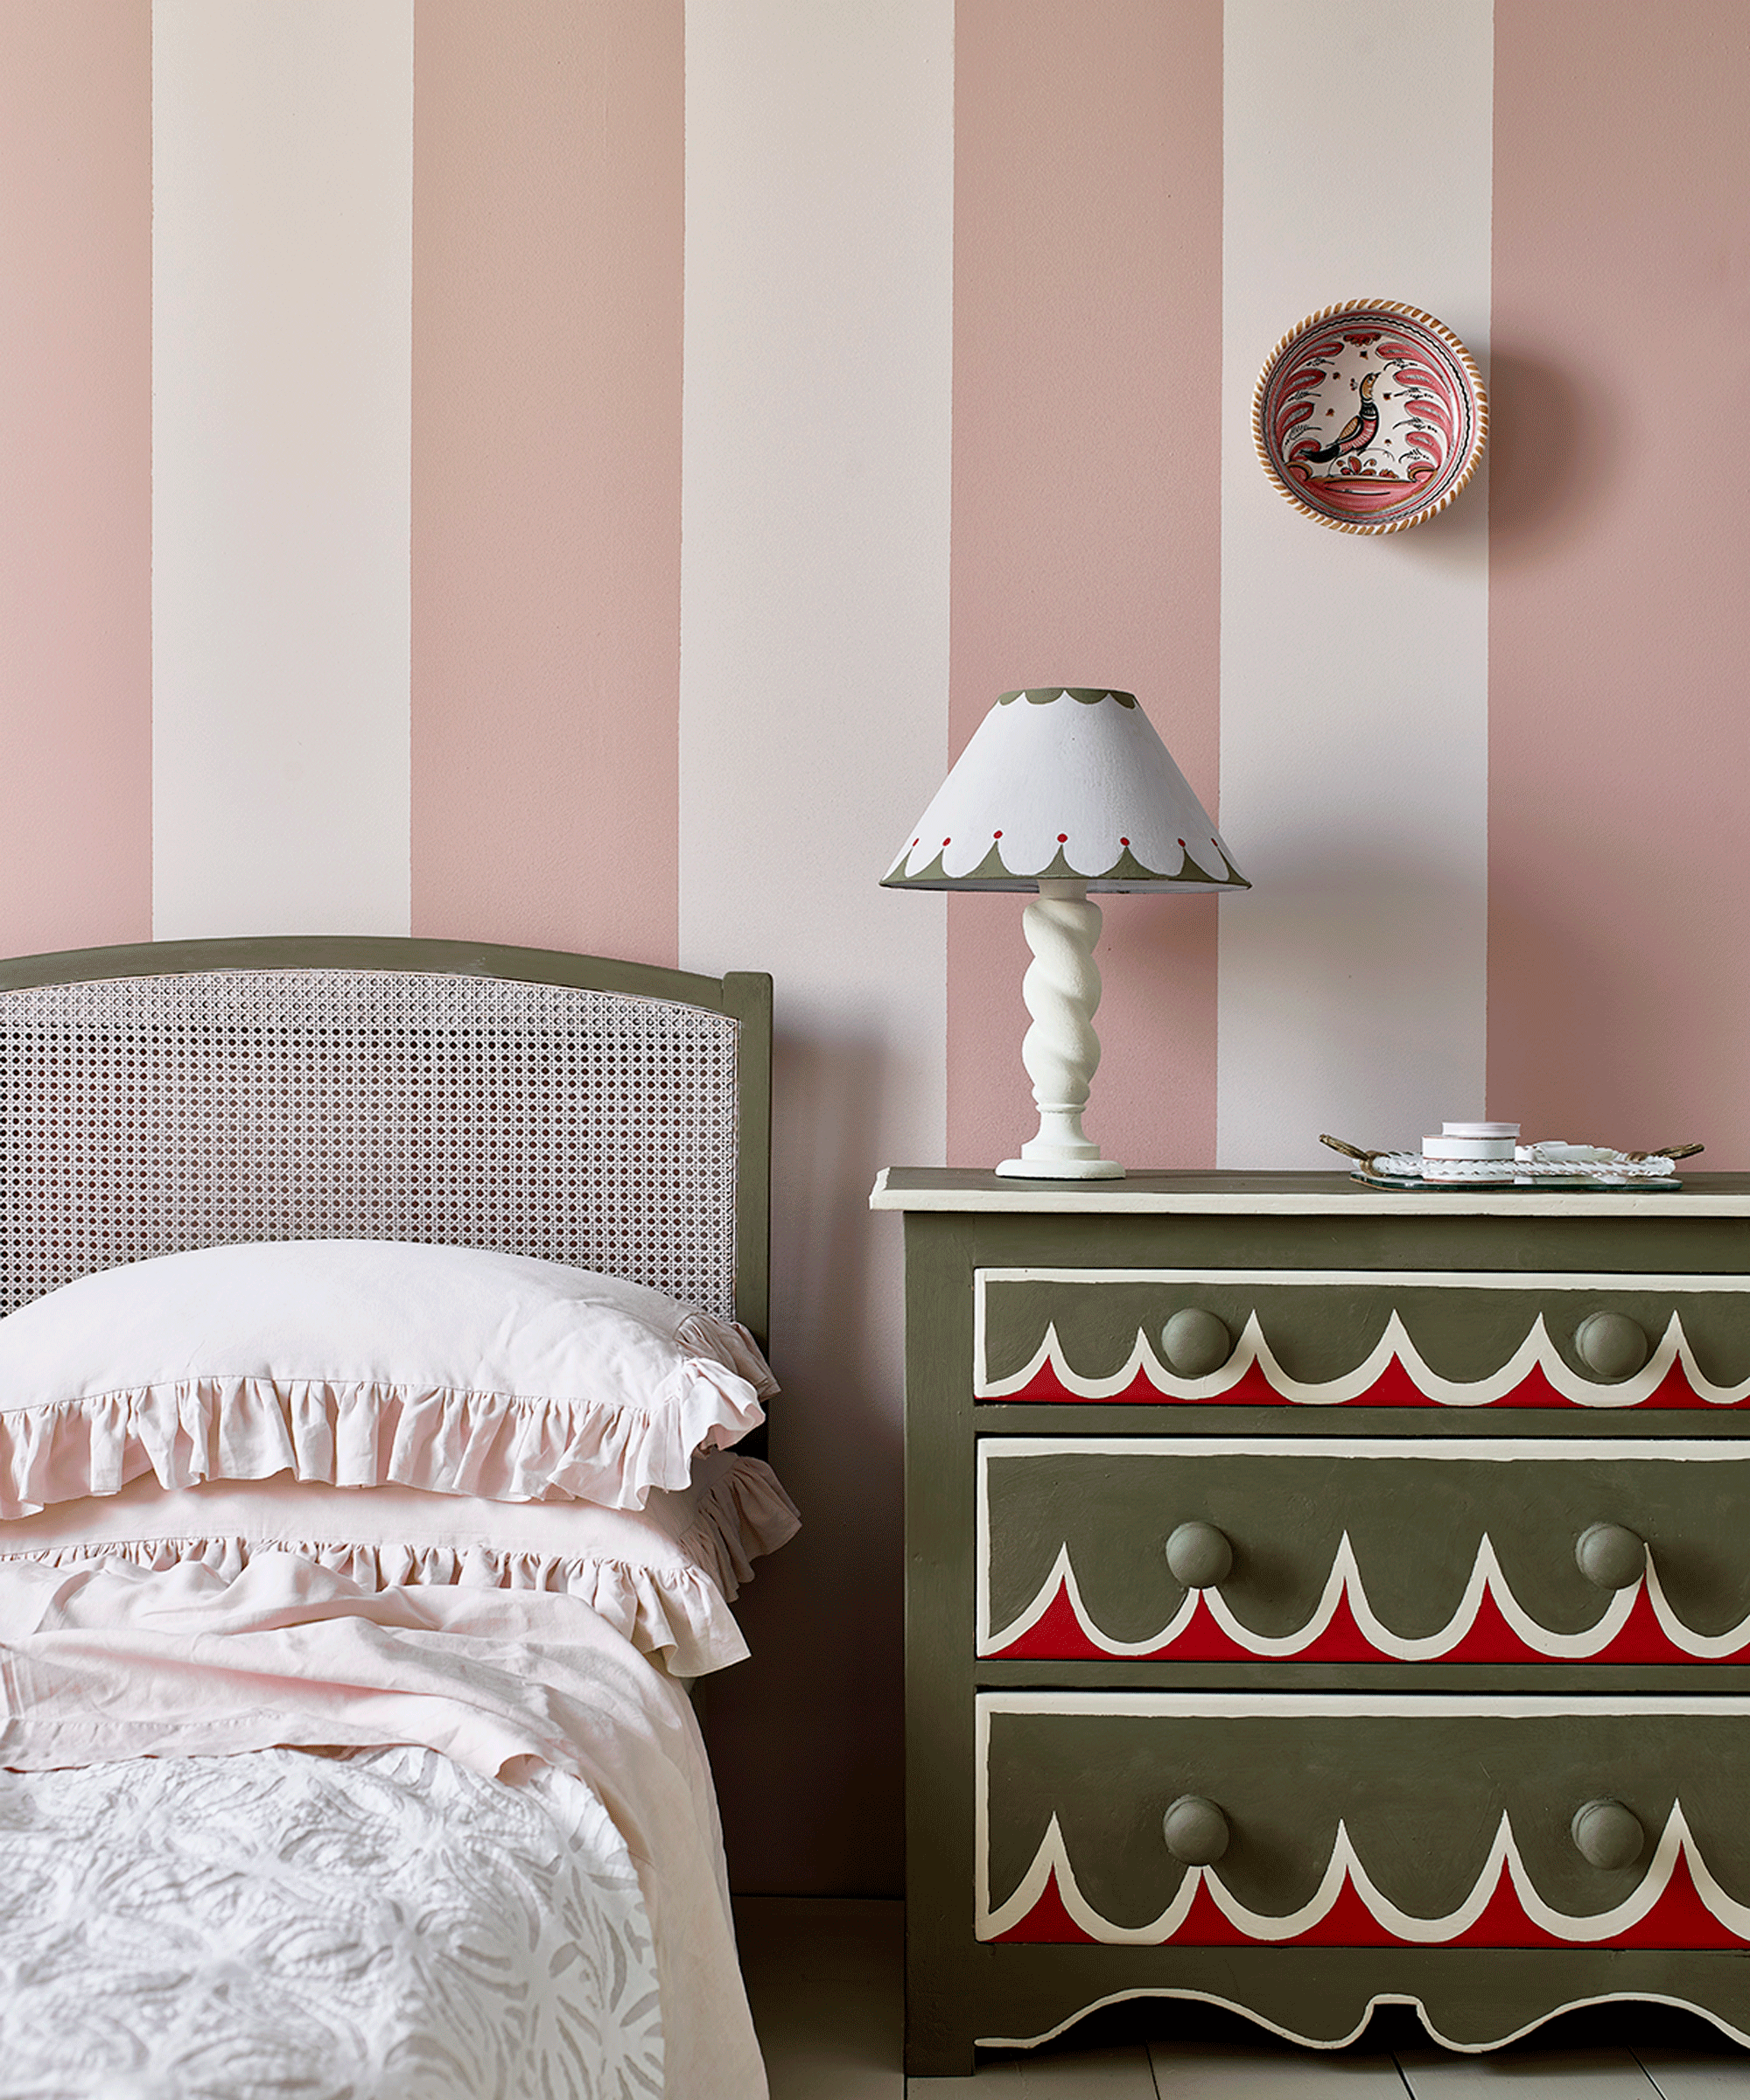 Bedroom with pink and white walls and patterned bedside table